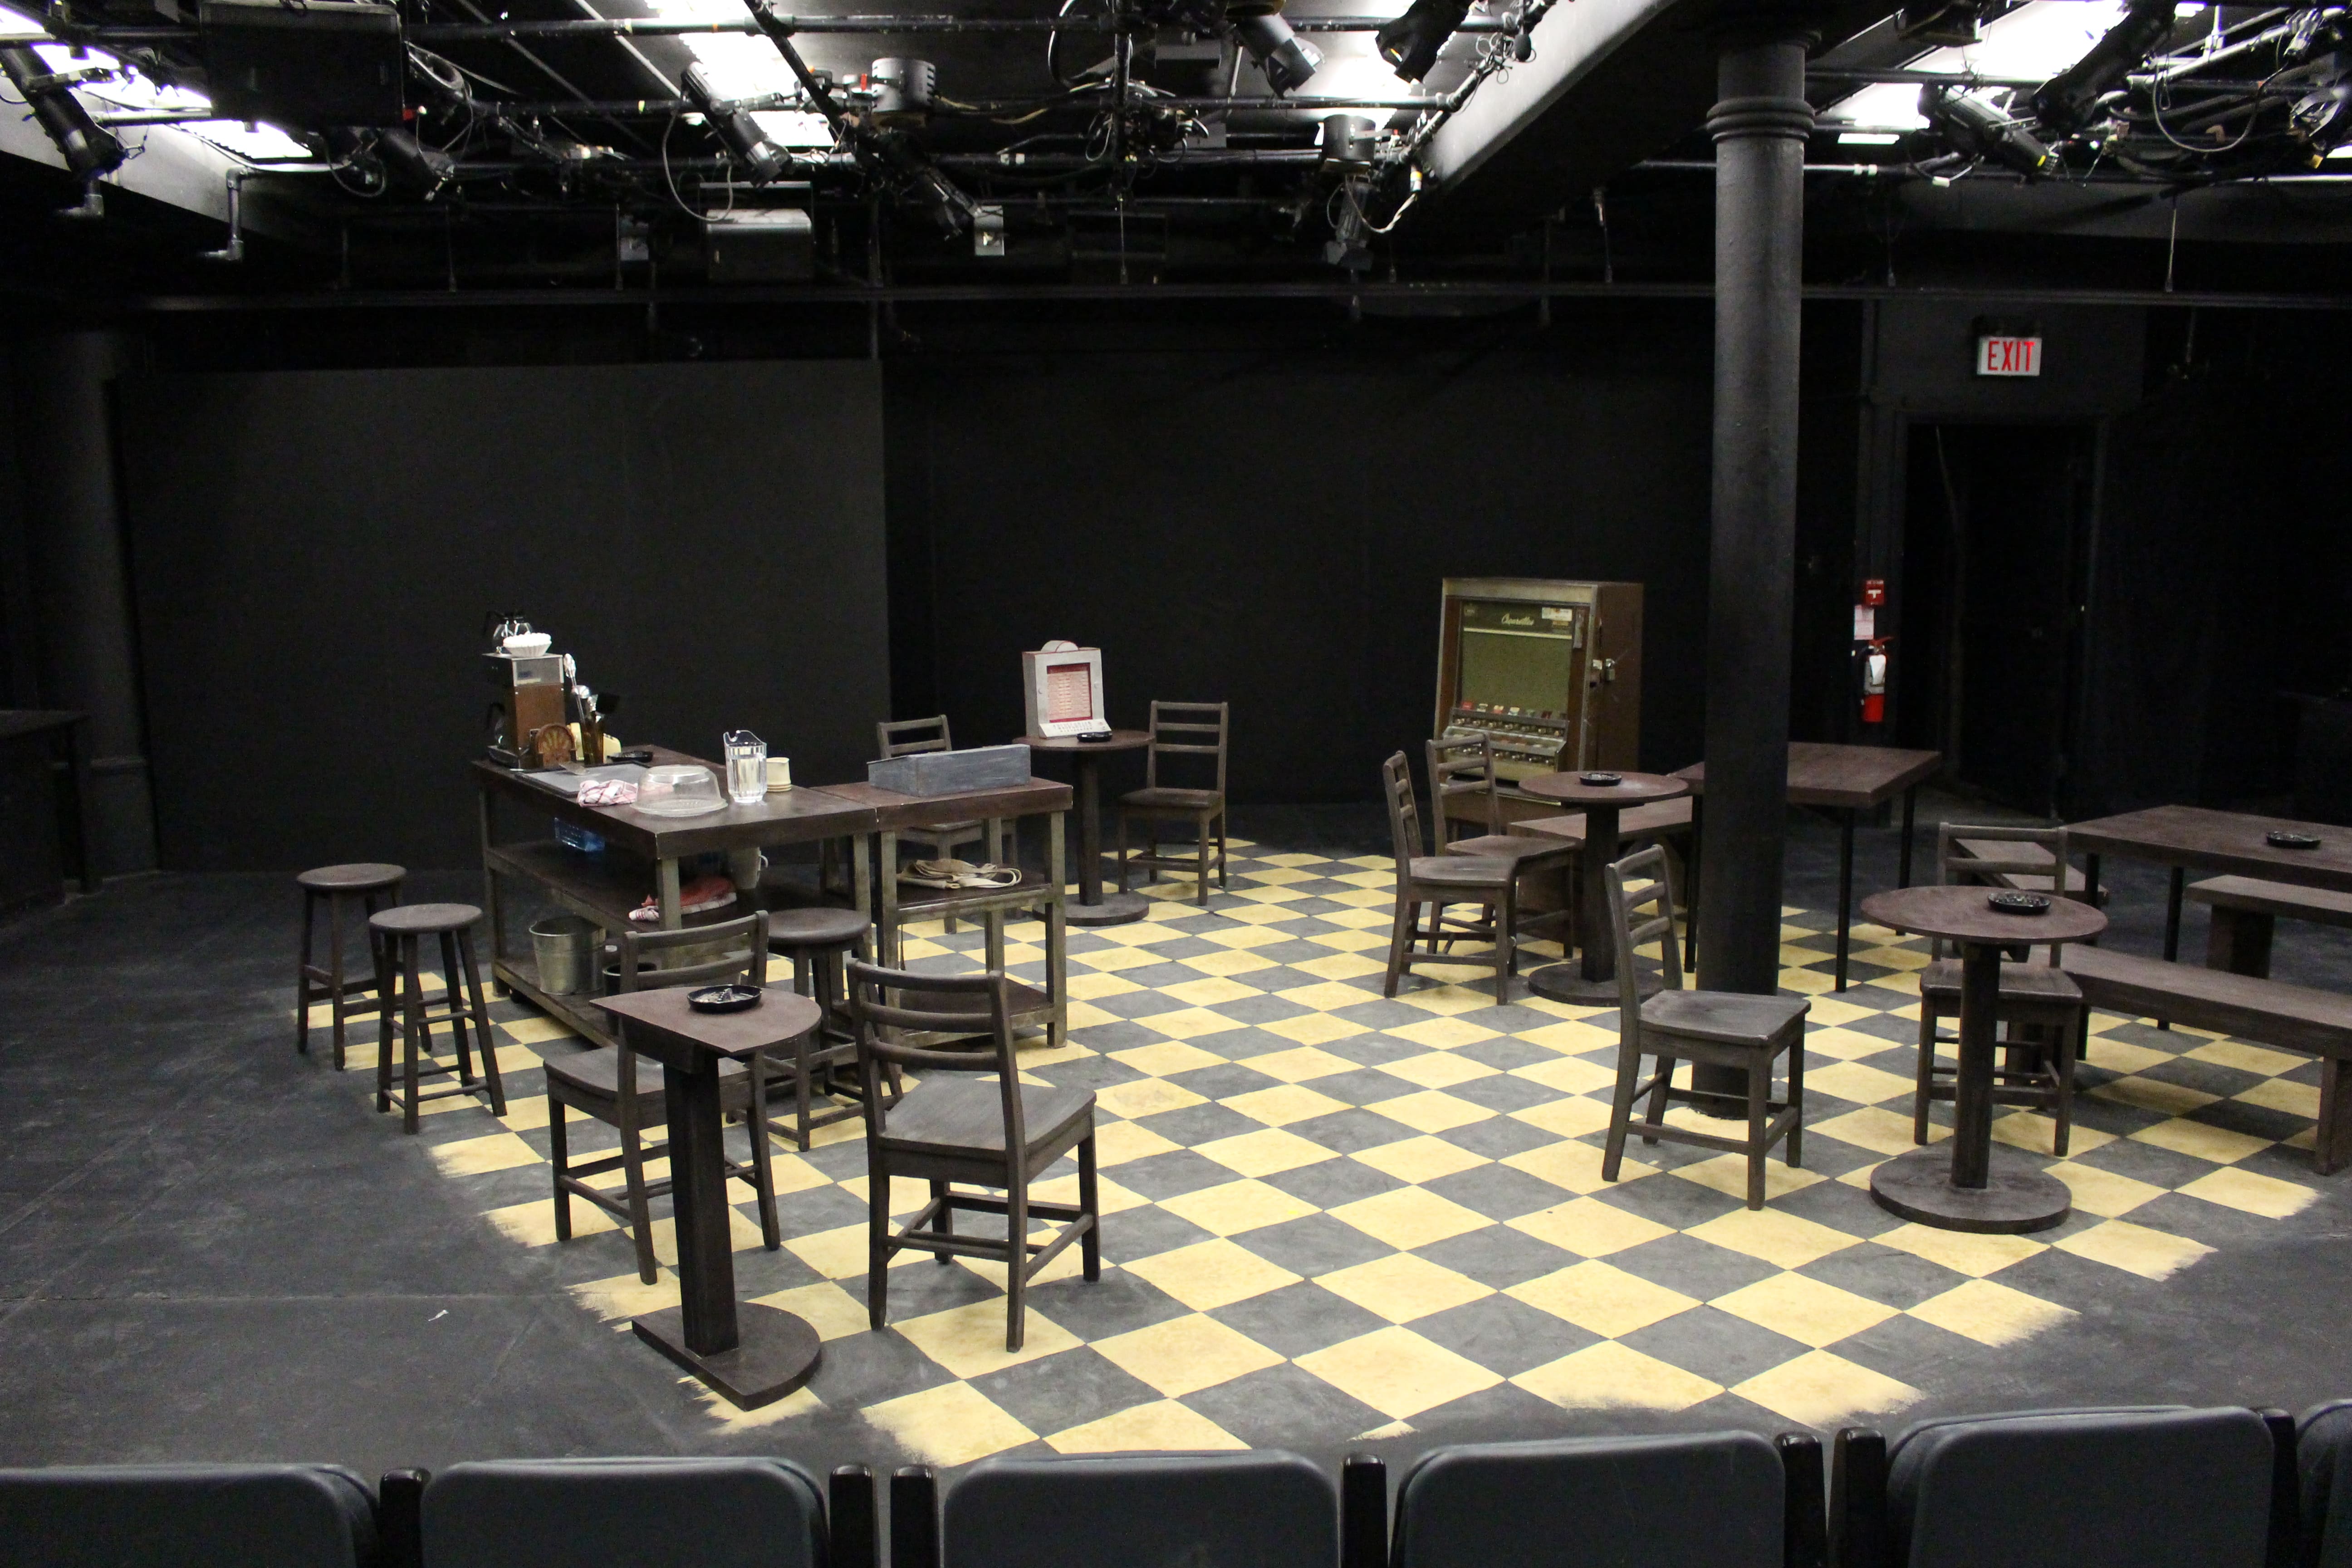 The set of a play replicates an old greasy spoon diner